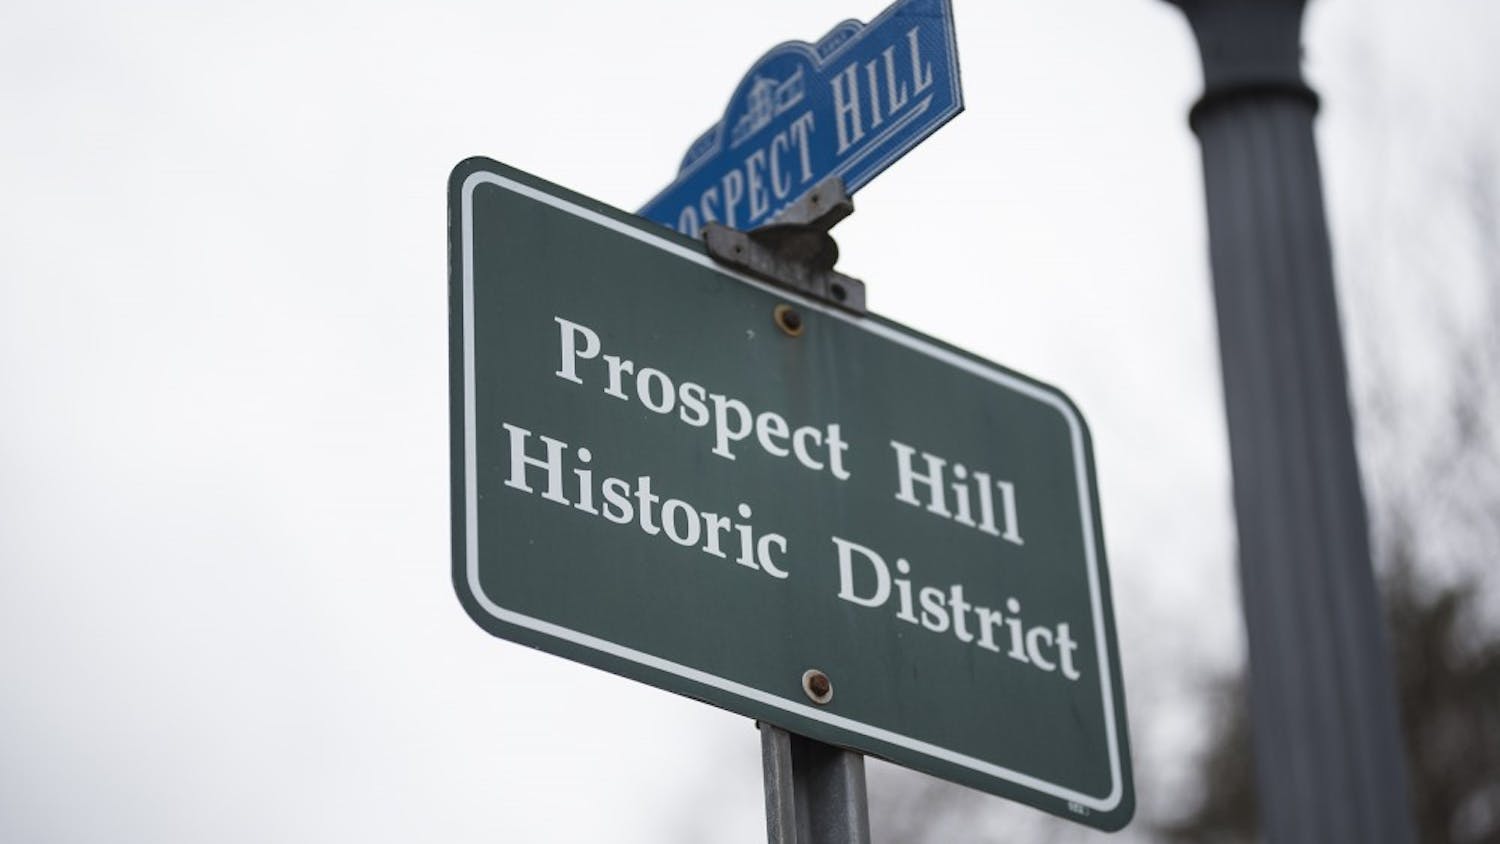 Prospect Hill historic district is located minutes from downtown Bloomington. Homeowners in historic districts must get any change to their houses, including installing solar panels, approved by the Historic Preservation Commission.